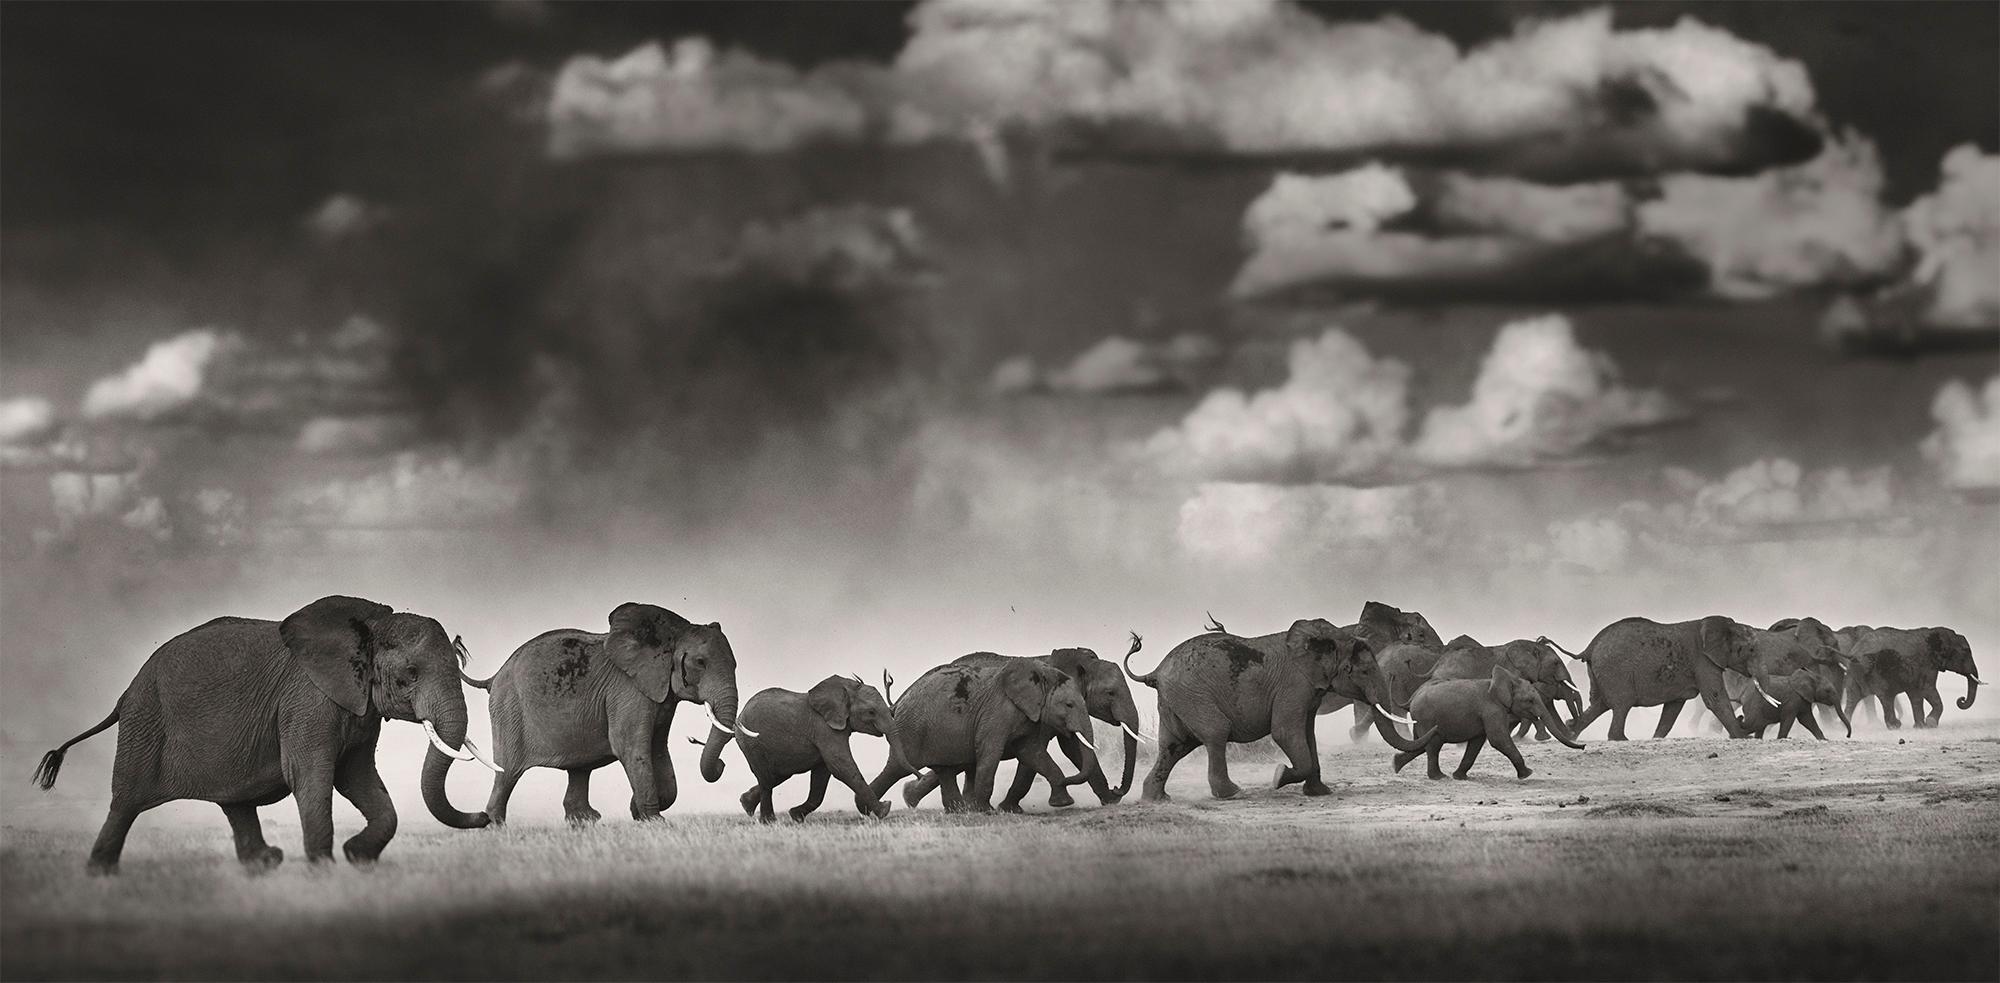 Thunderstorm II, Platinum, animal, elephant, black and white photography - Photograph by Joachim Schmeisser